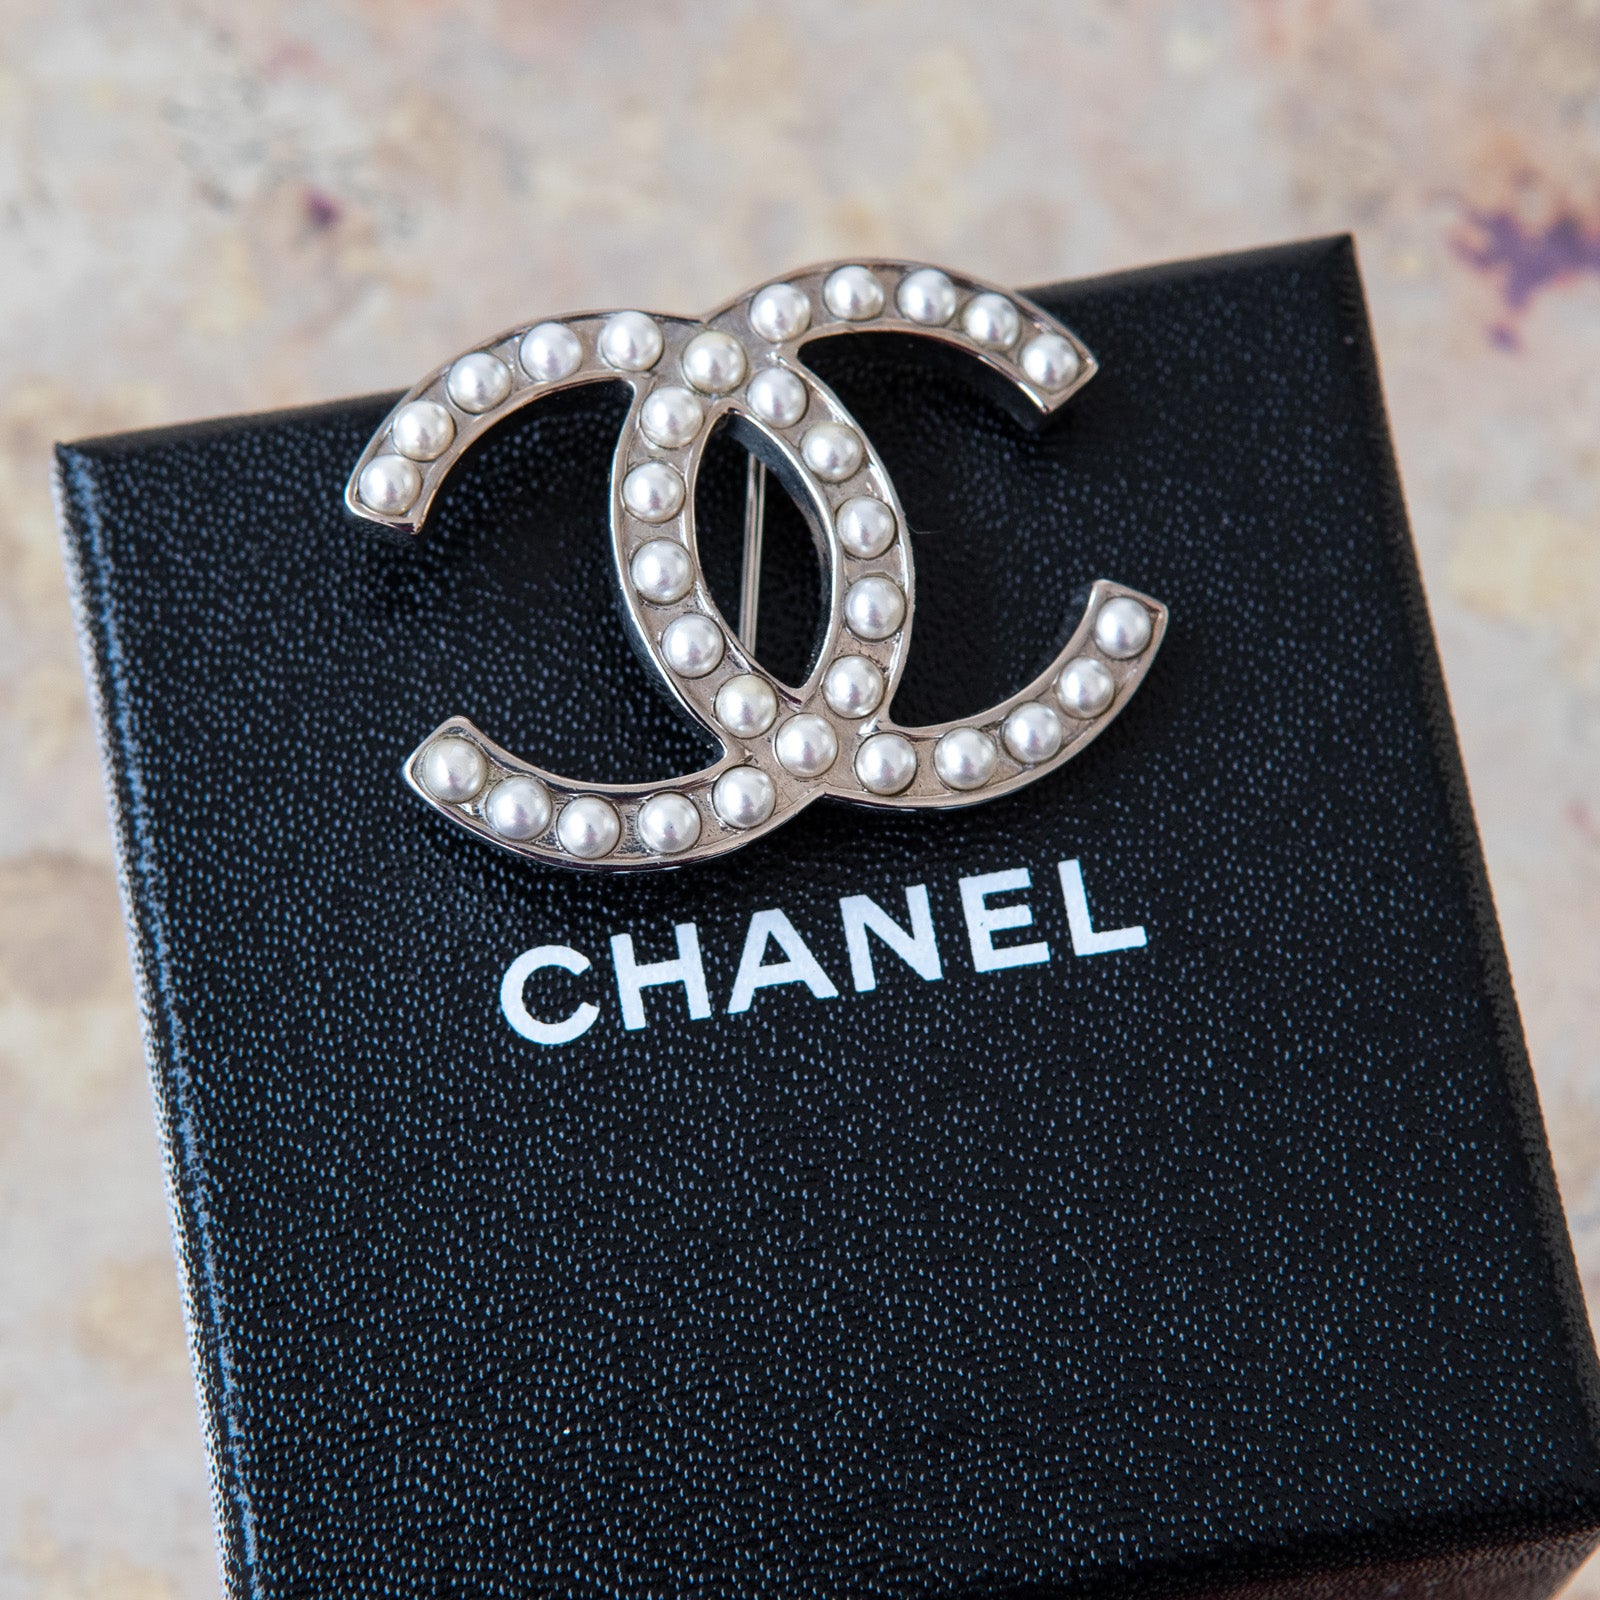 Chanel Faux Pearl Brooch - Image 3 of 5